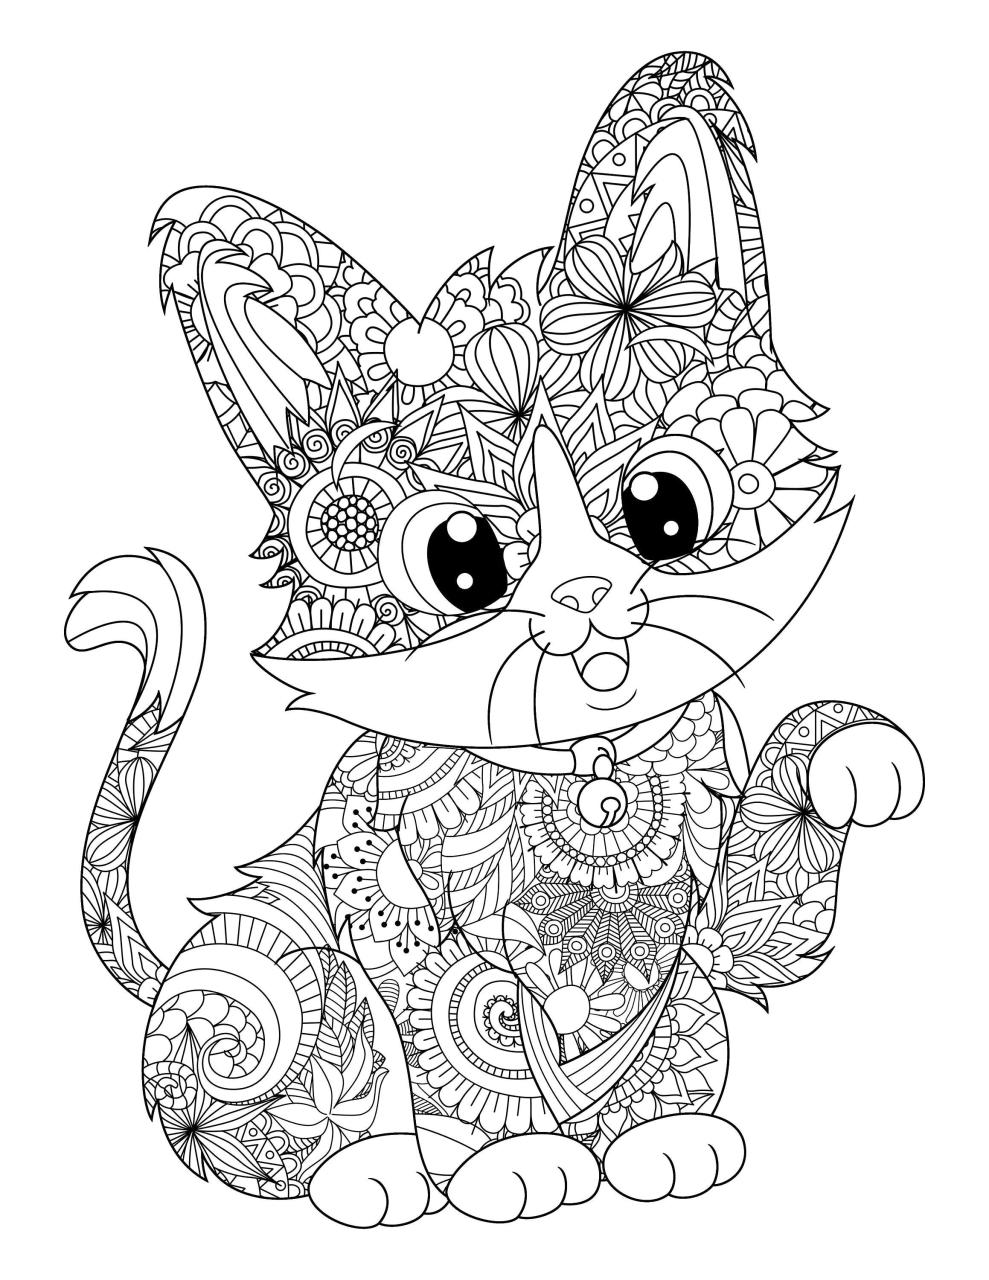 Cat Animal Mandala Coloring Page Instant Download Etsy